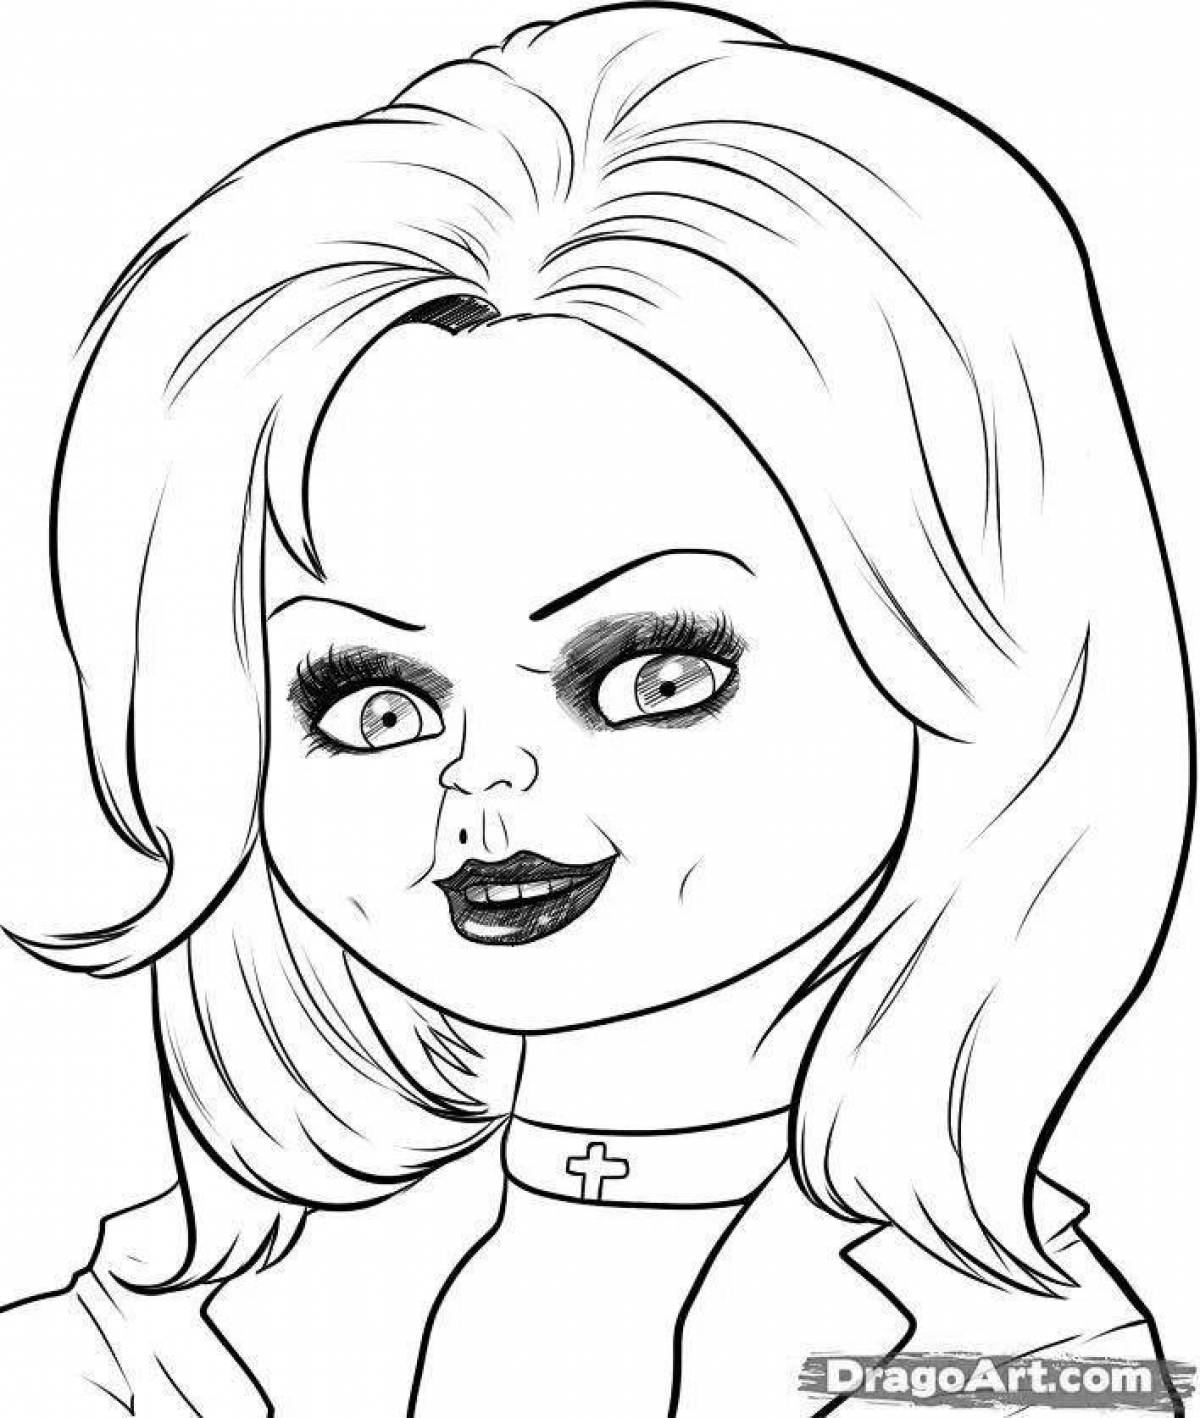 Coloring dreamy chucky doll